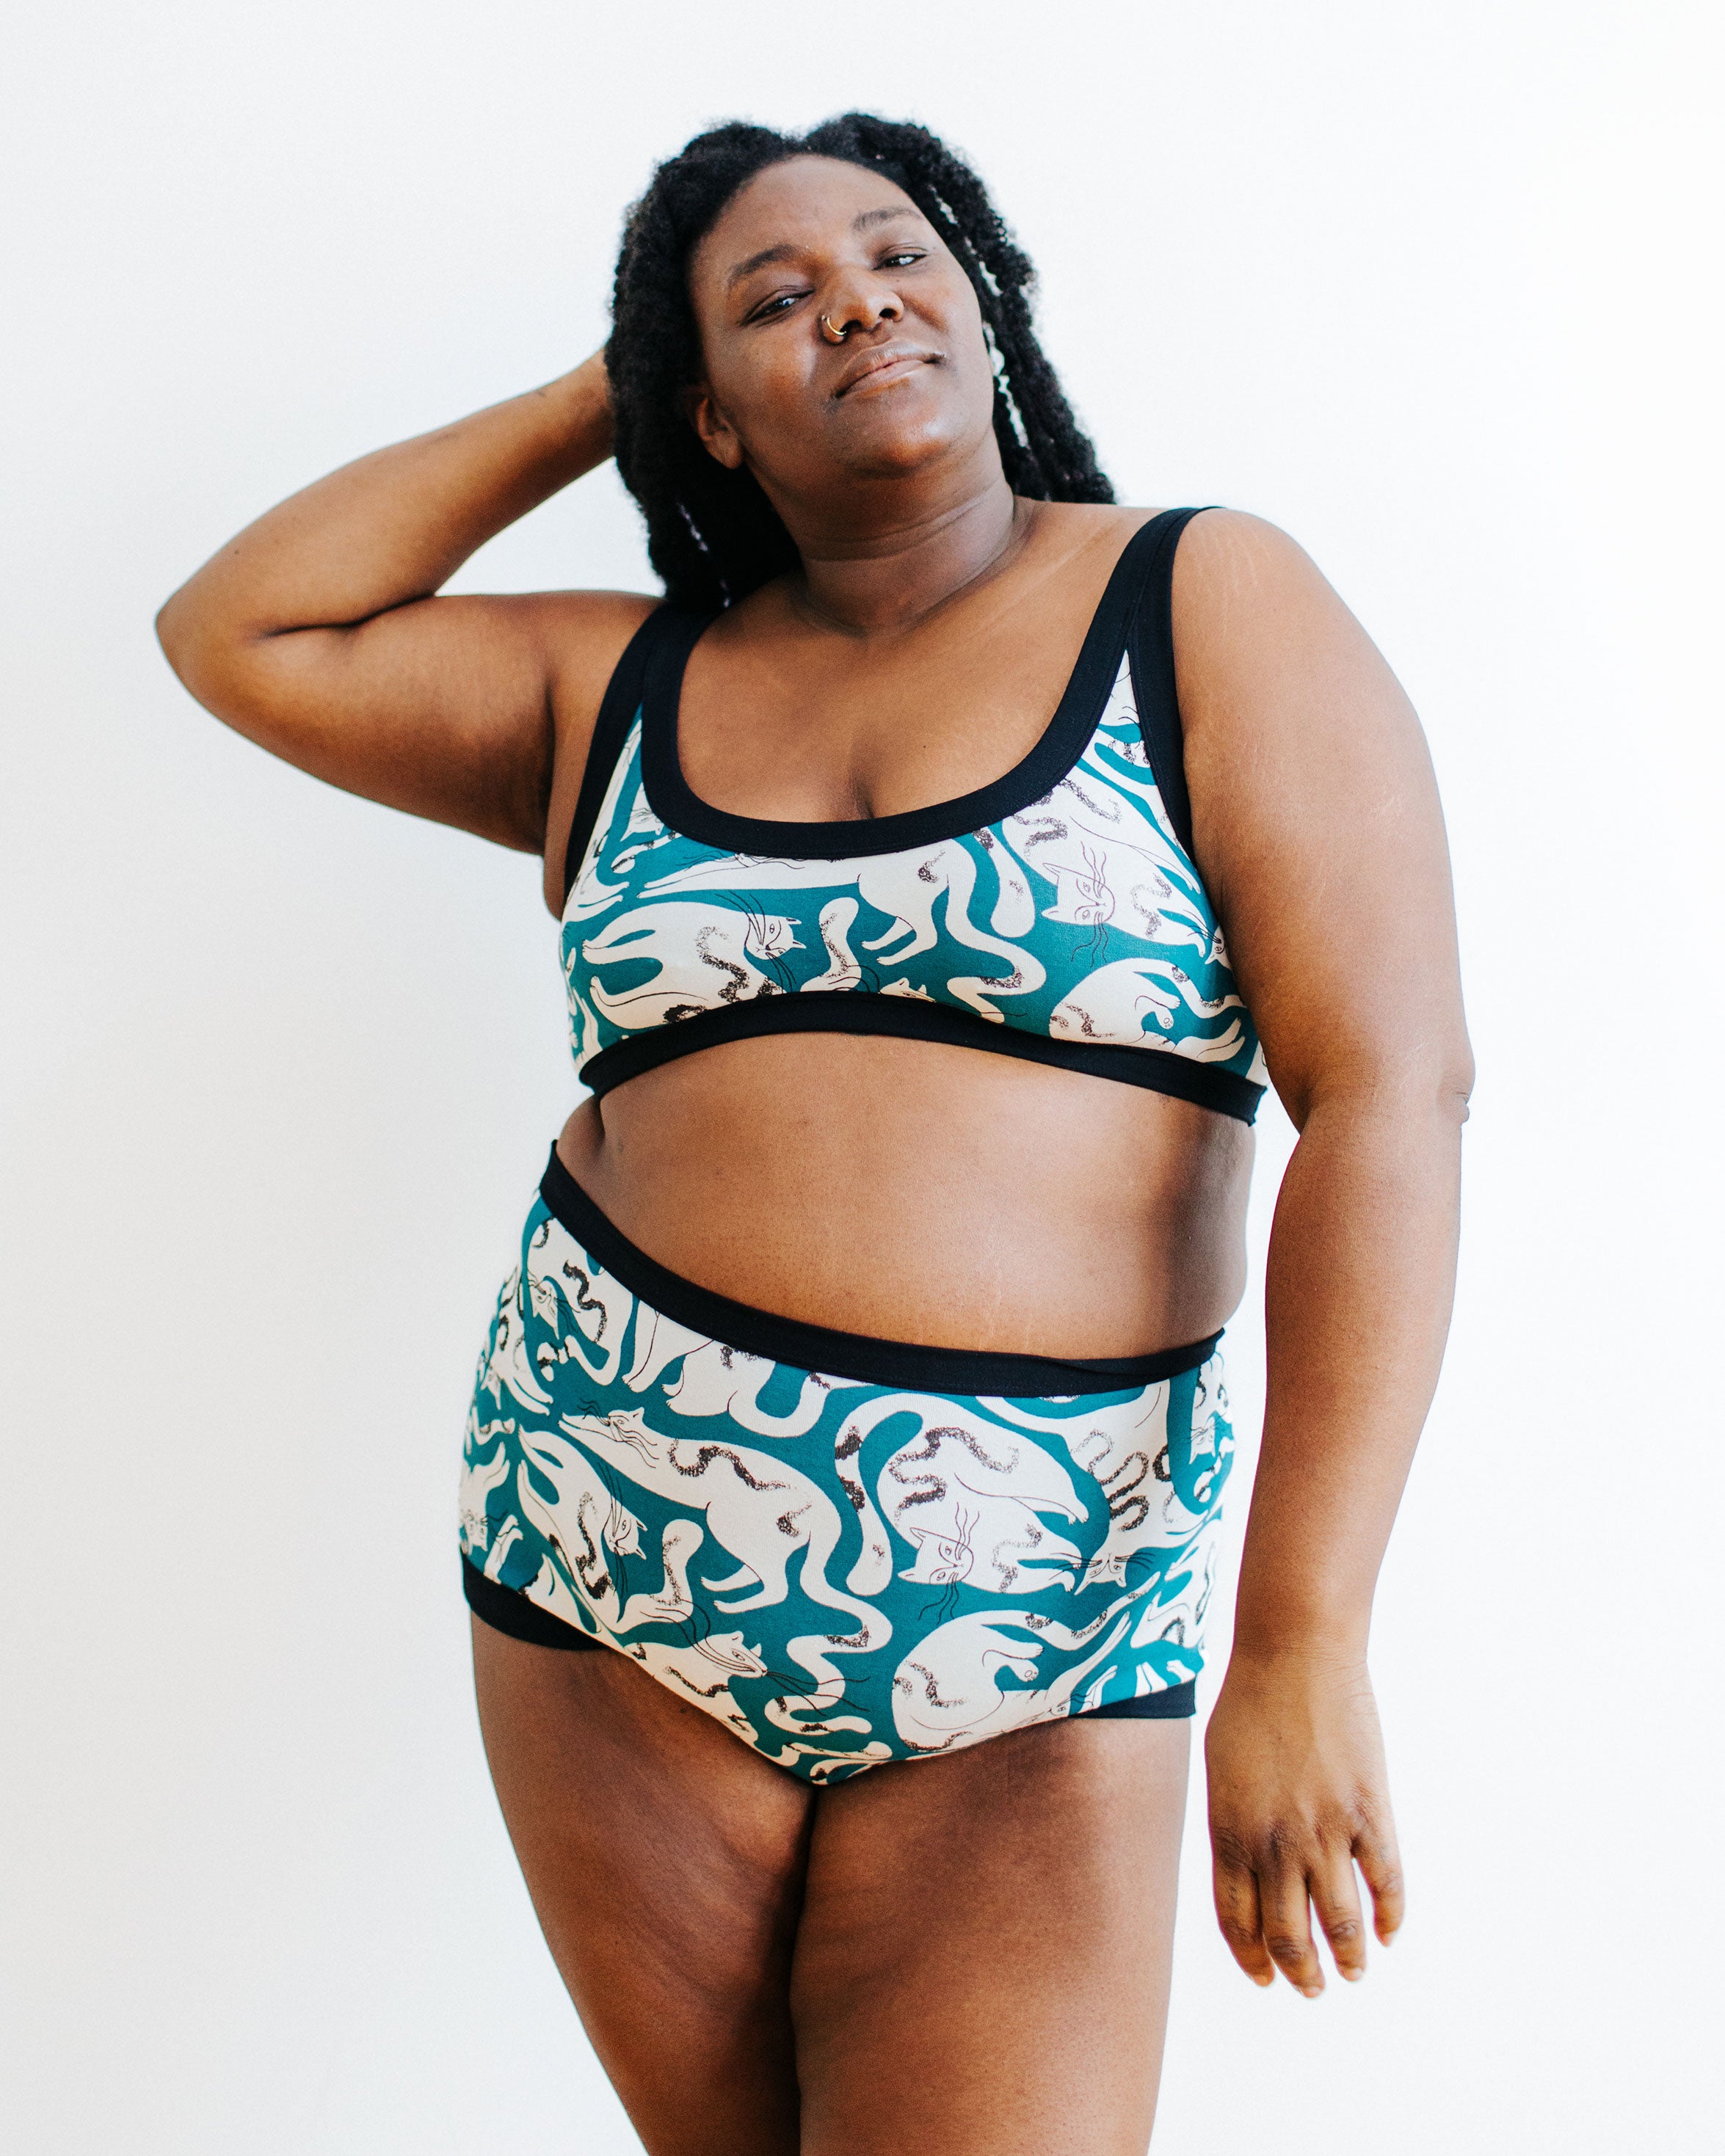 A model wearing a Bralette and Sky Rise set in Hey Meow! print - green with white cats.